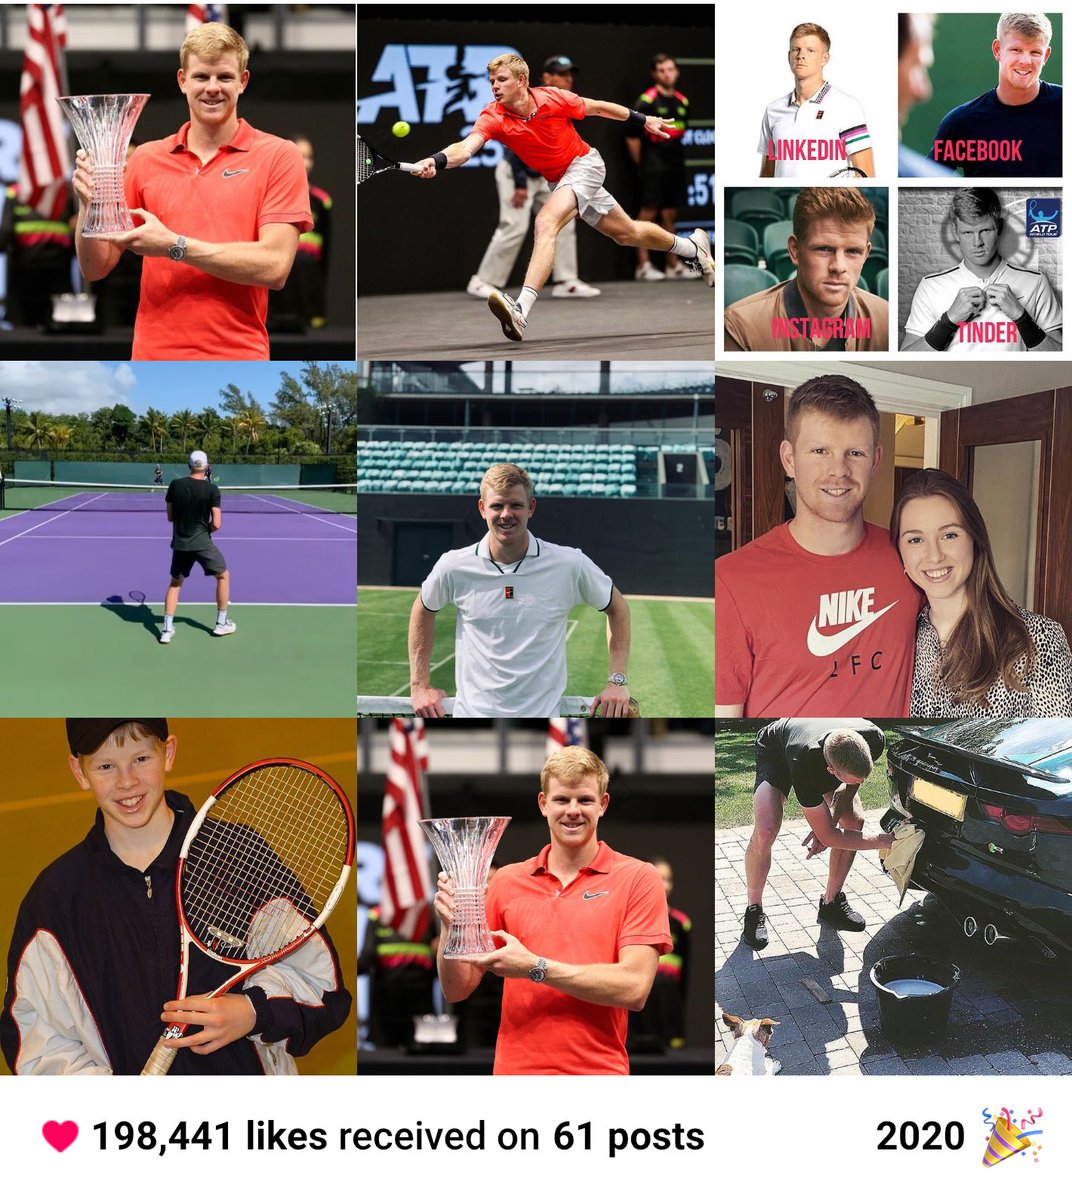 Top 9 of 2020! Happy New Year to you all 🎉 Thanks for all the support last year and looking forward to seeing what this year will bring 🎾